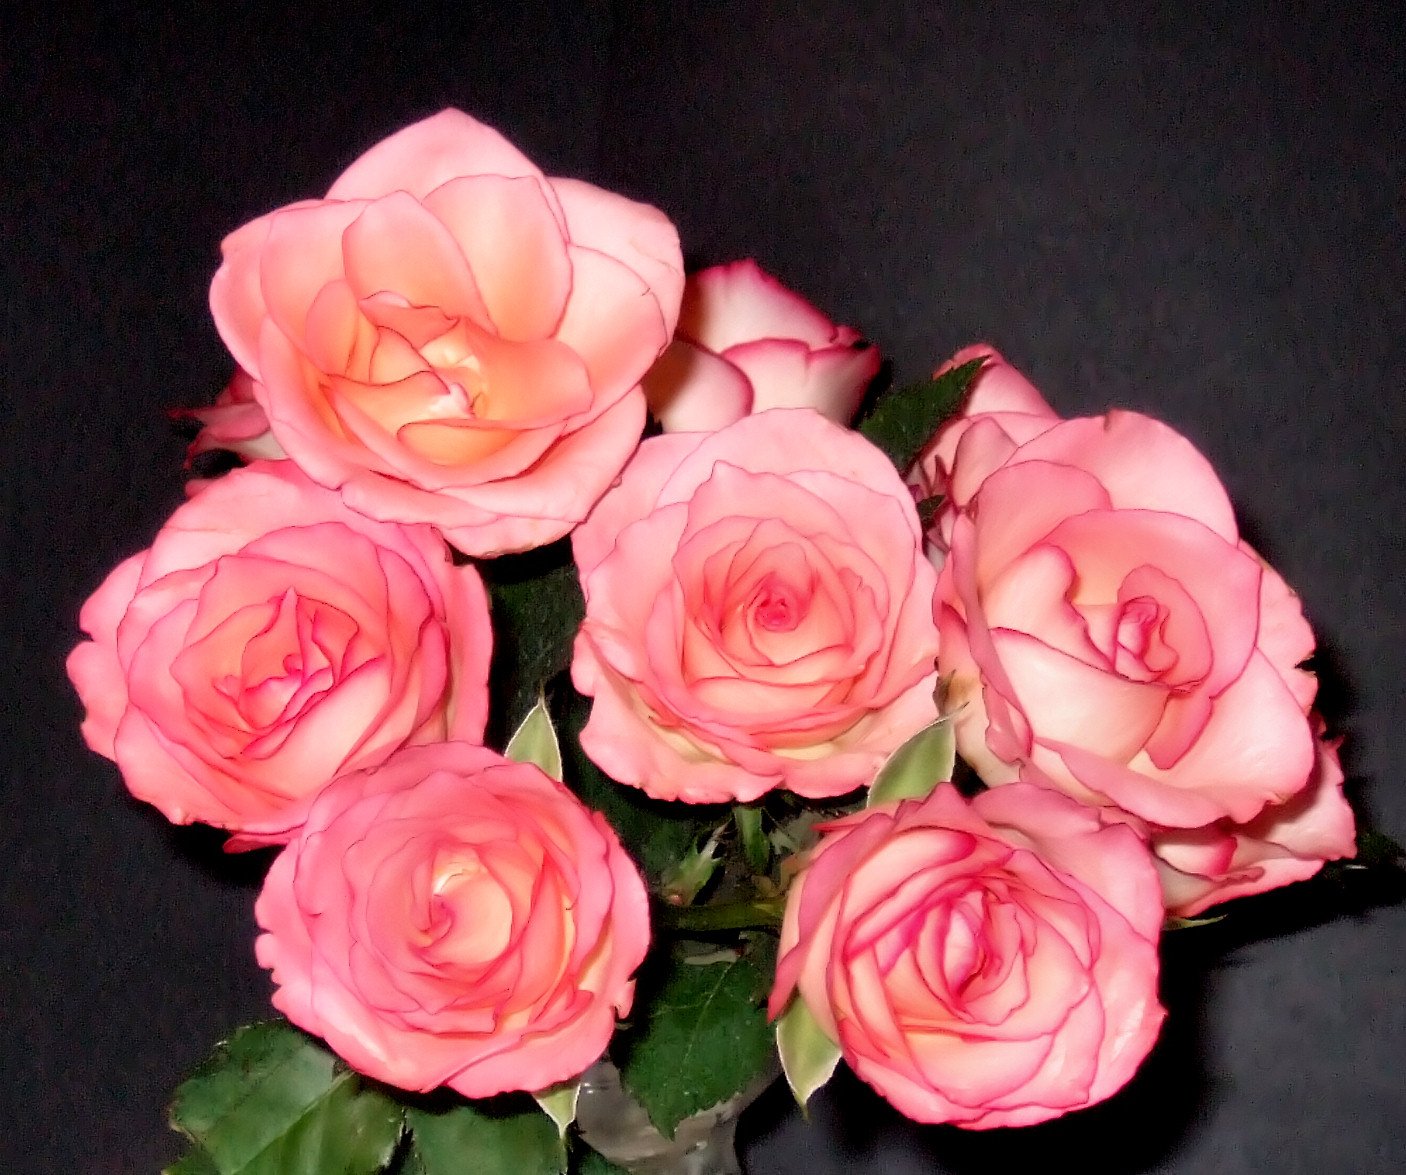 some pink roses with green stems in a vase